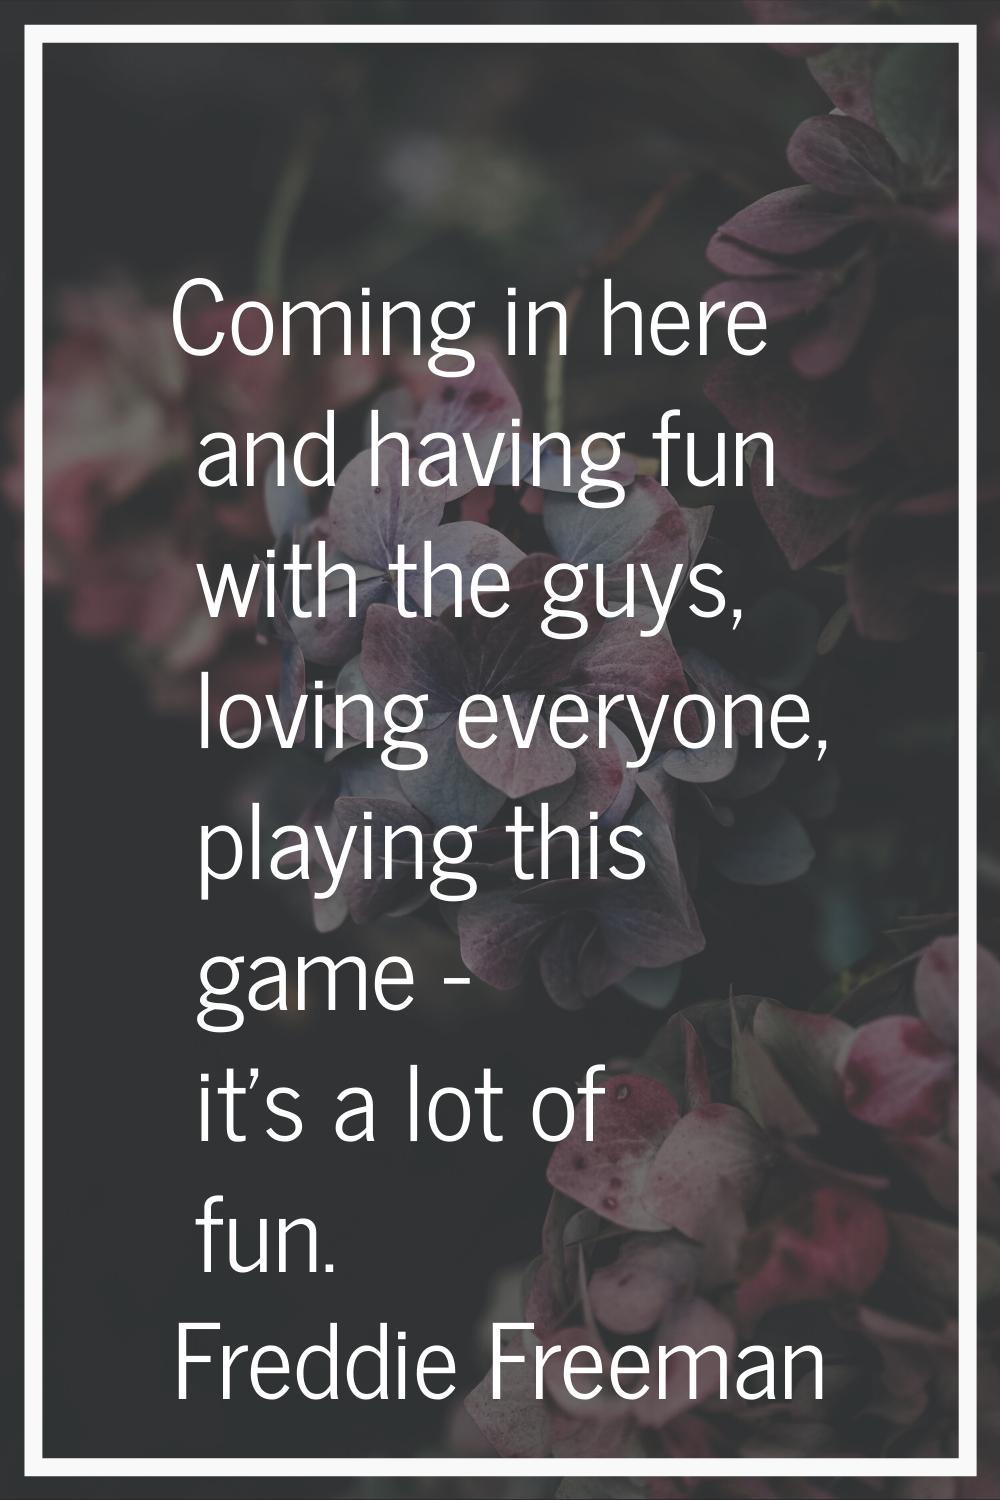 Coming in here and having fun with the guys, loving everyone, playing this game - it's a lot of fun